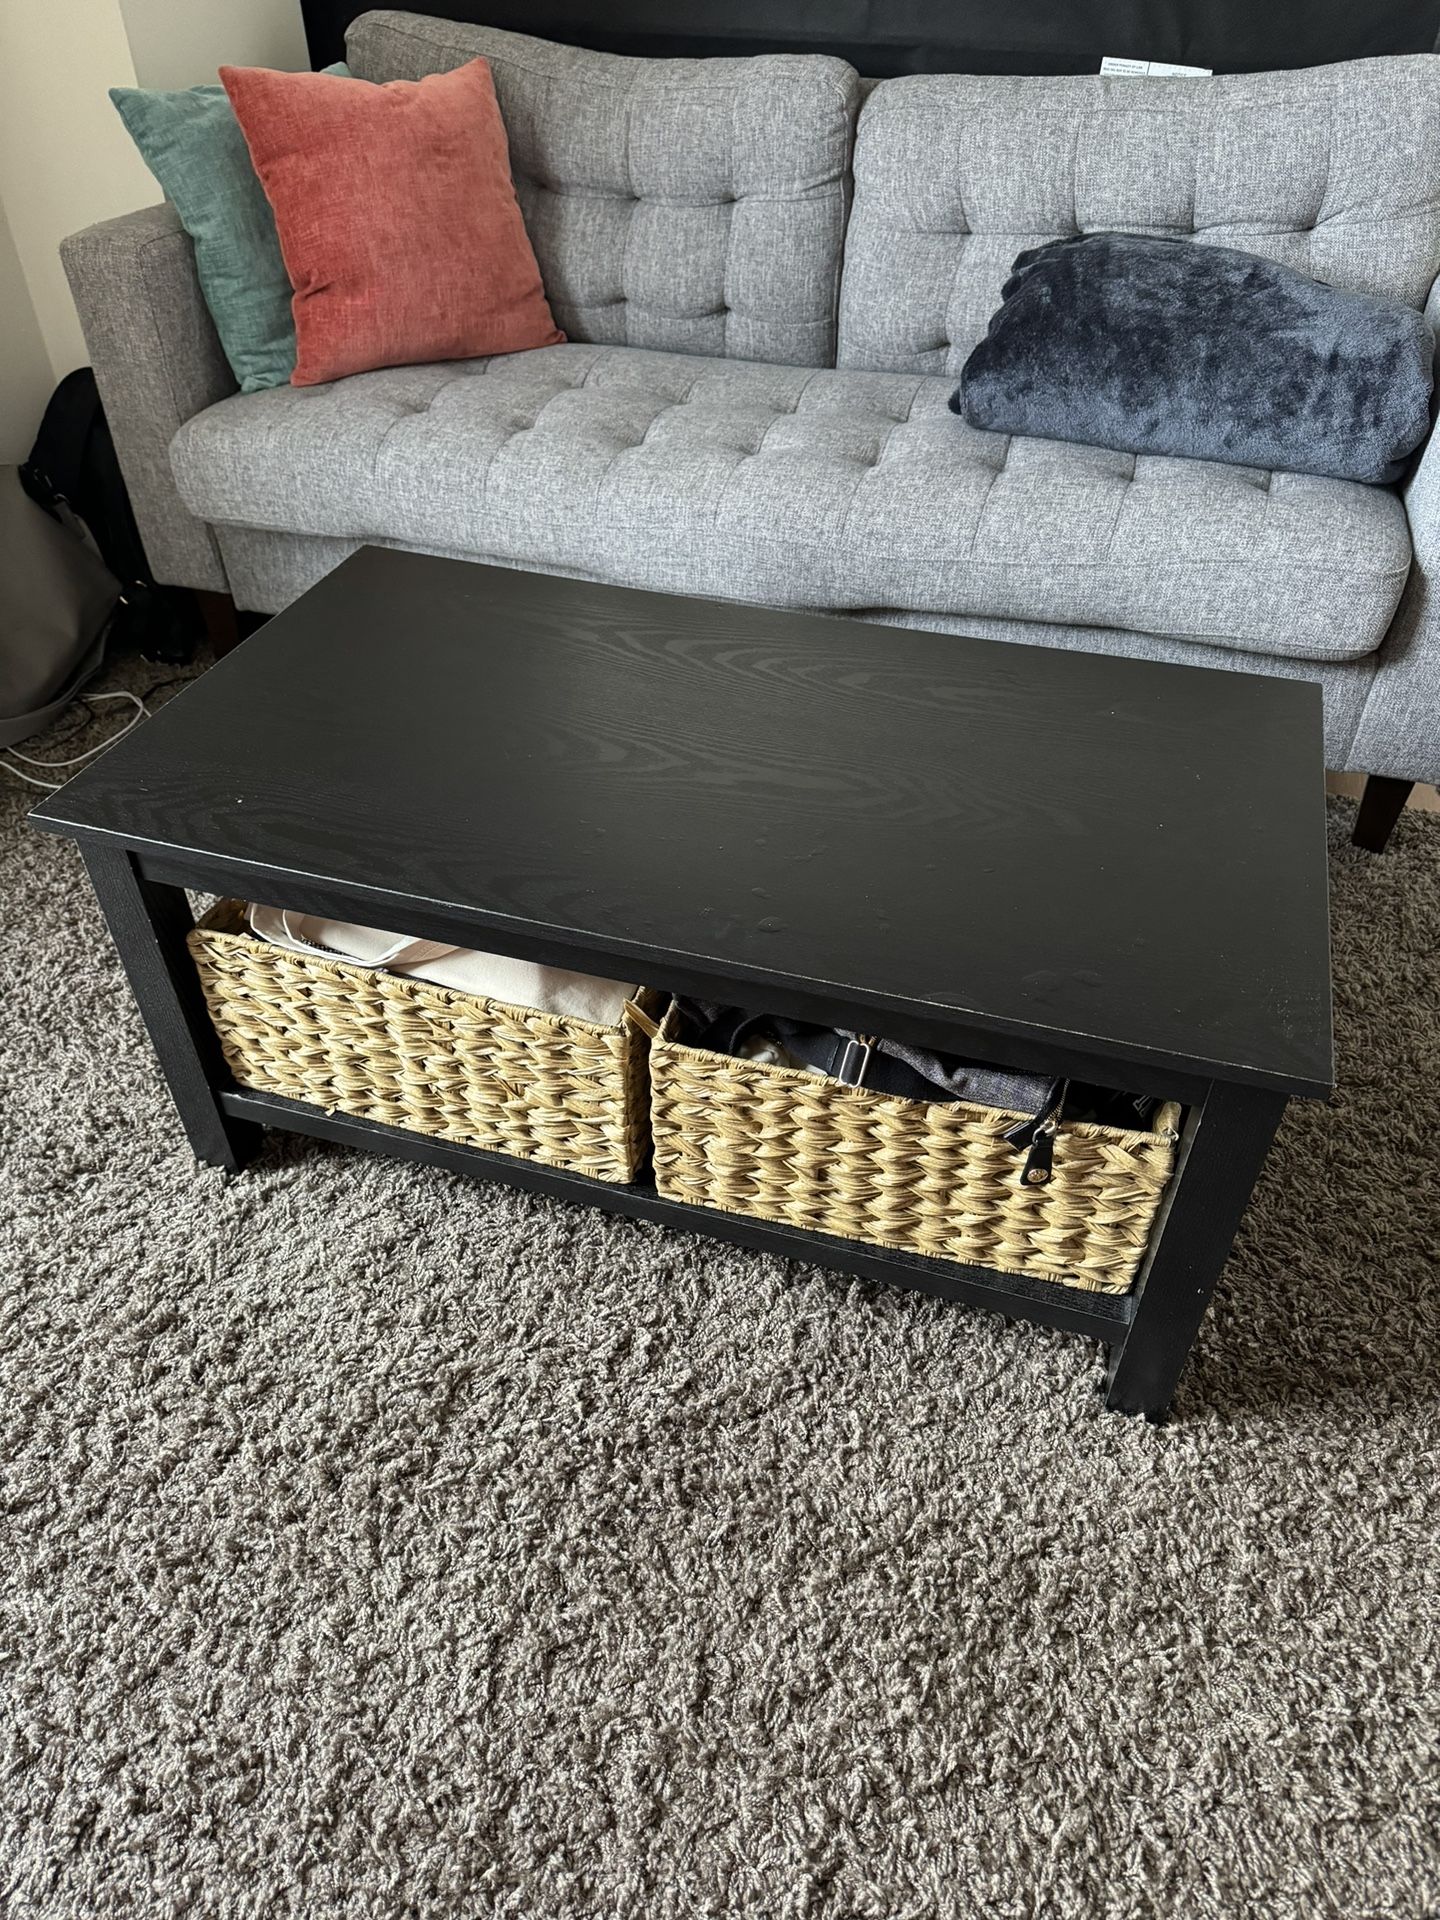 Wooden Coffee Table With Storage Space 